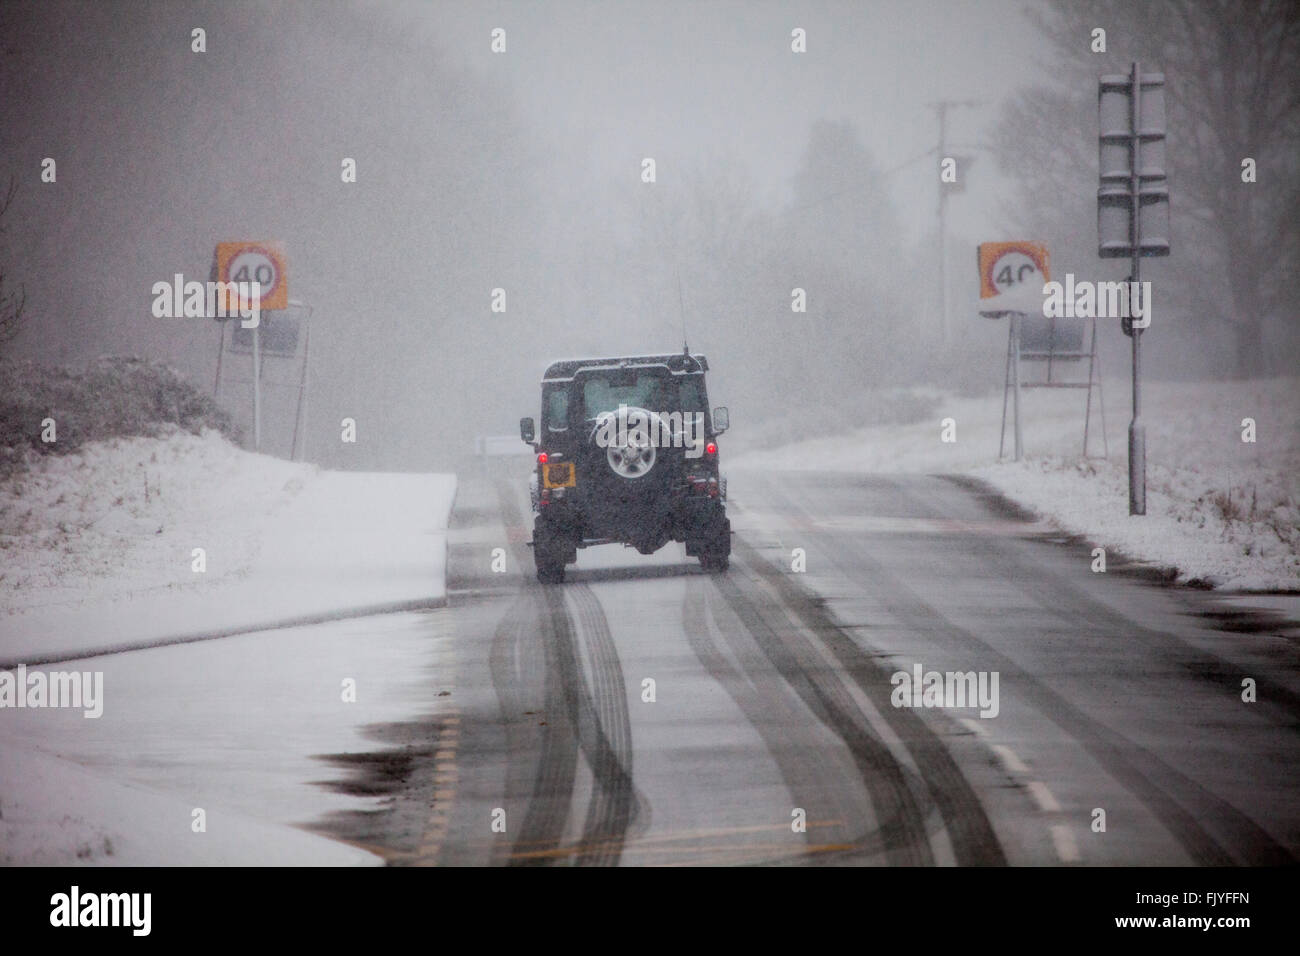 A 4x4 land rover tackling slipper snow wintry conditons on a rural road in blizzard conditions on Halkyn Mountain, Wales, UK Stock Photo